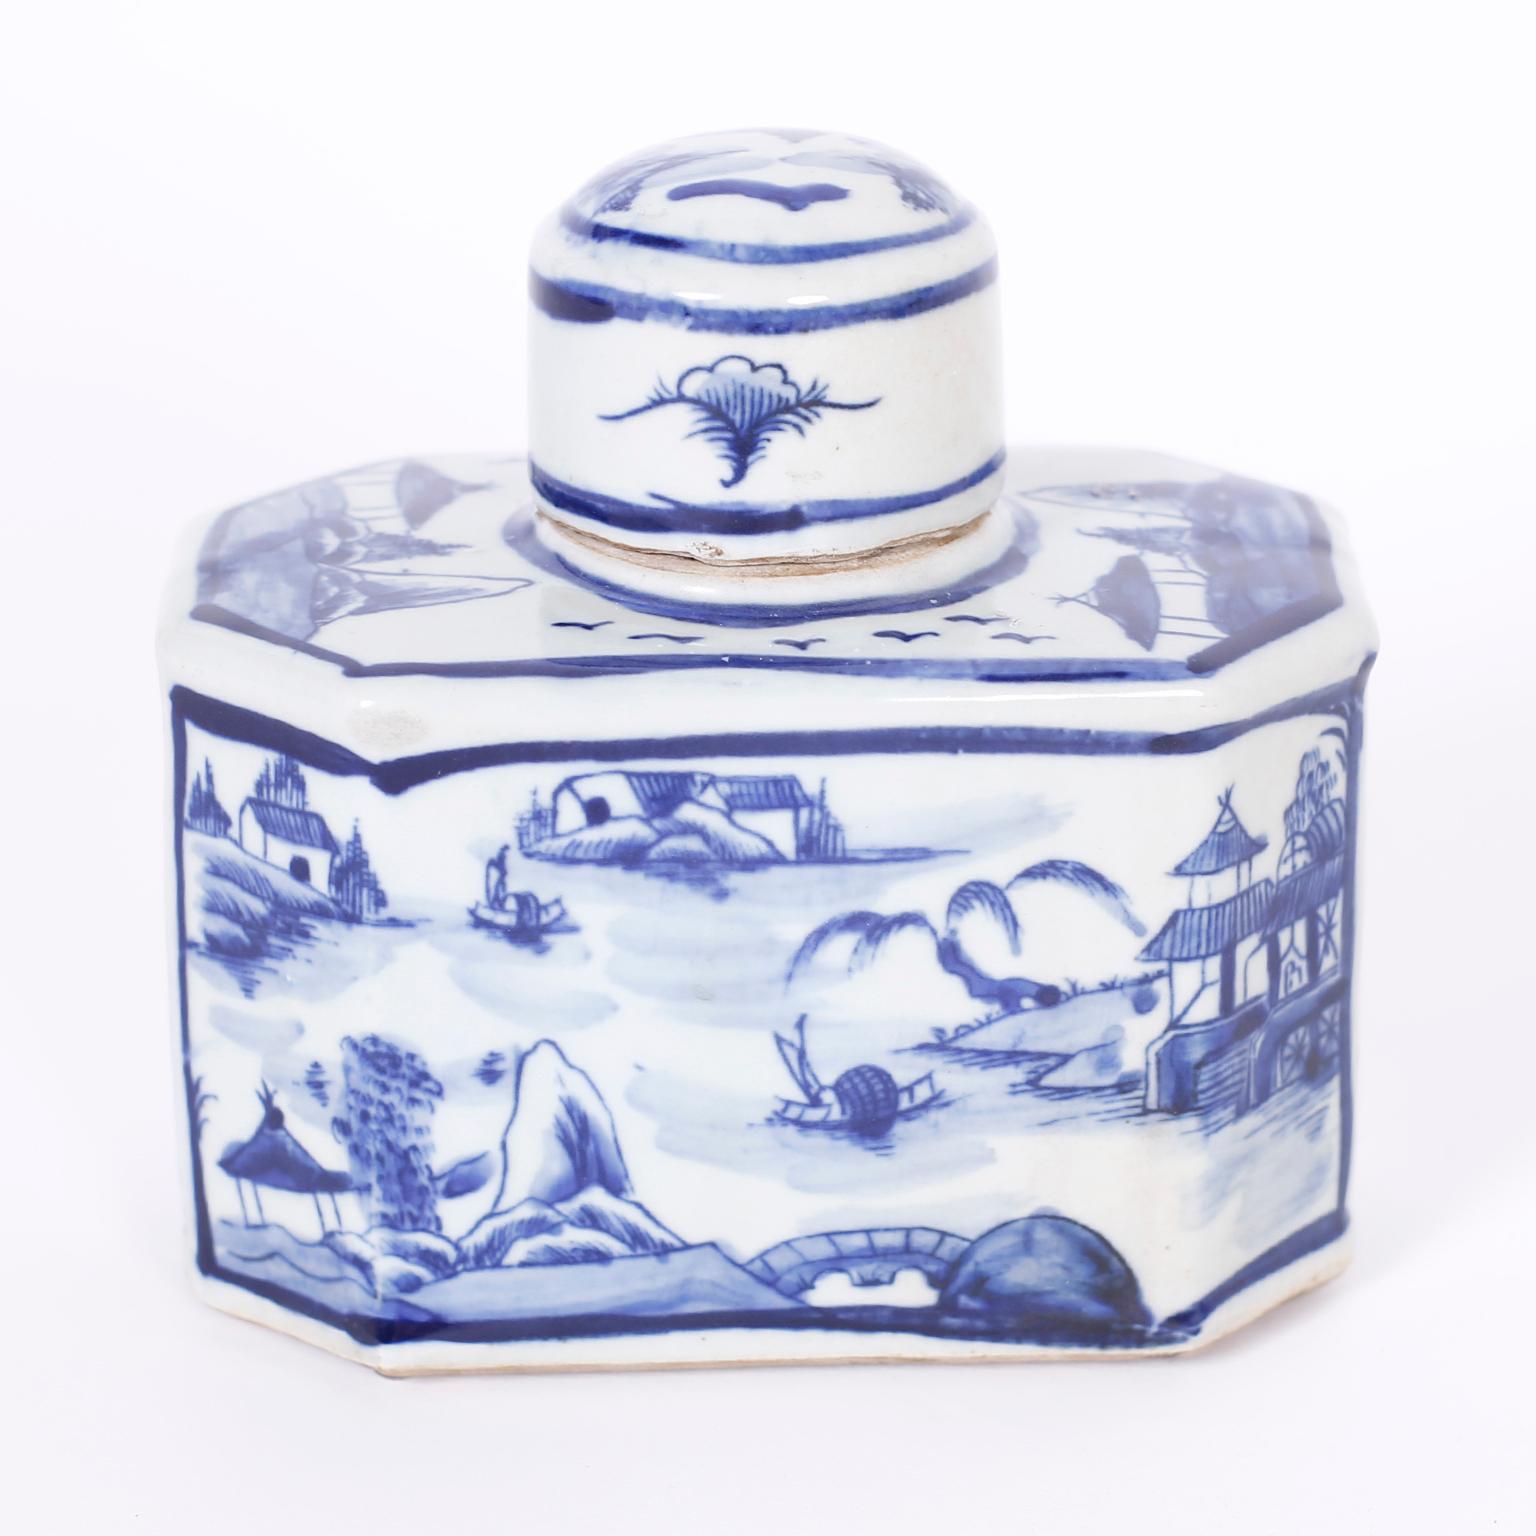 Pair of Chinese Blue and White Porcelain Tea Caddies with Landscapes 1